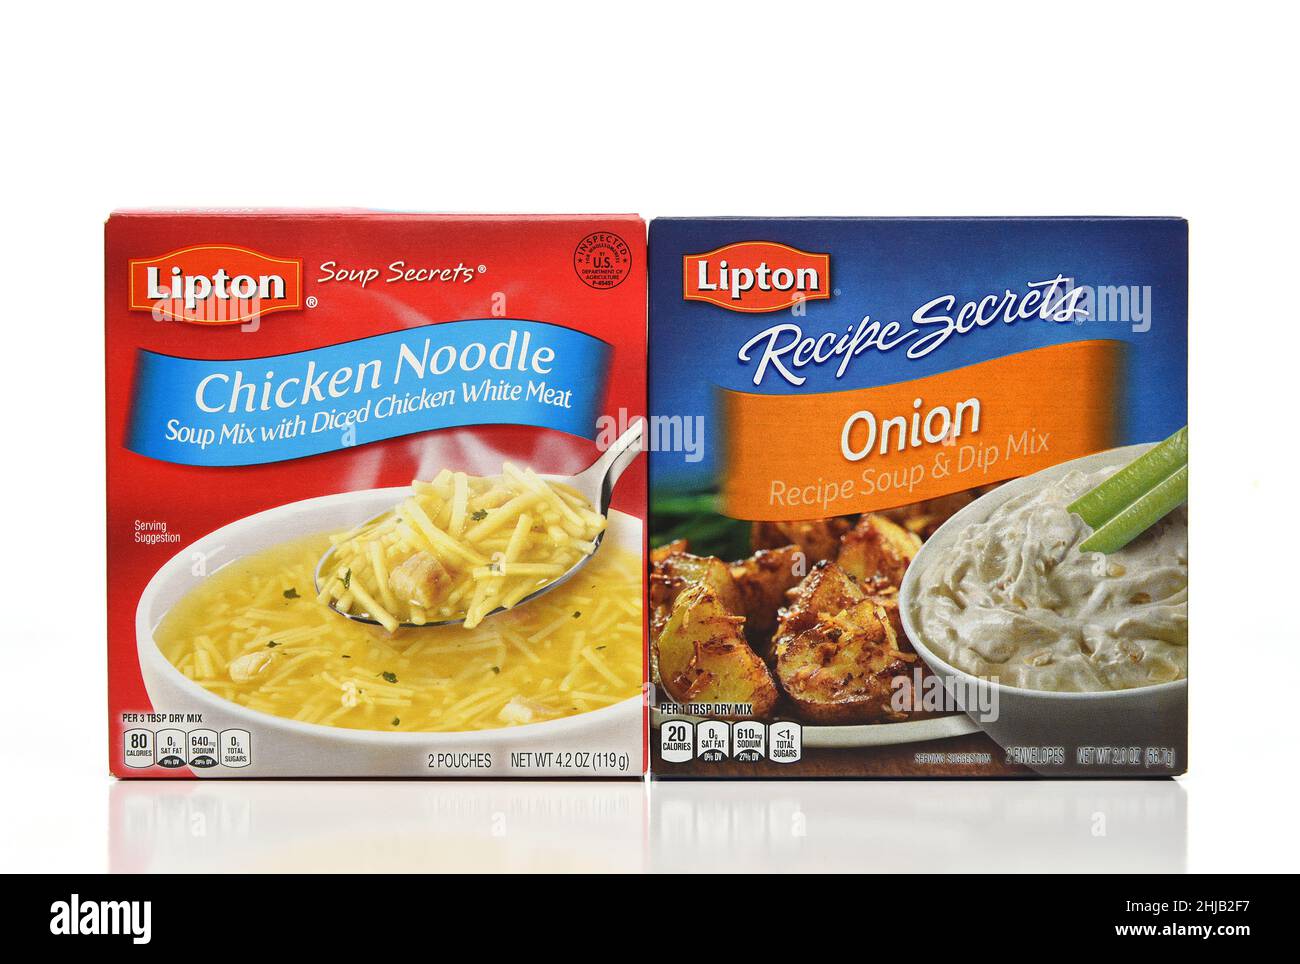 IRVINE, CALIFORNIA - 27 JAN 2022: A box of Lipton Chicken Noodle Soup Mix and Onion Soup and dip mix. Stock Photo